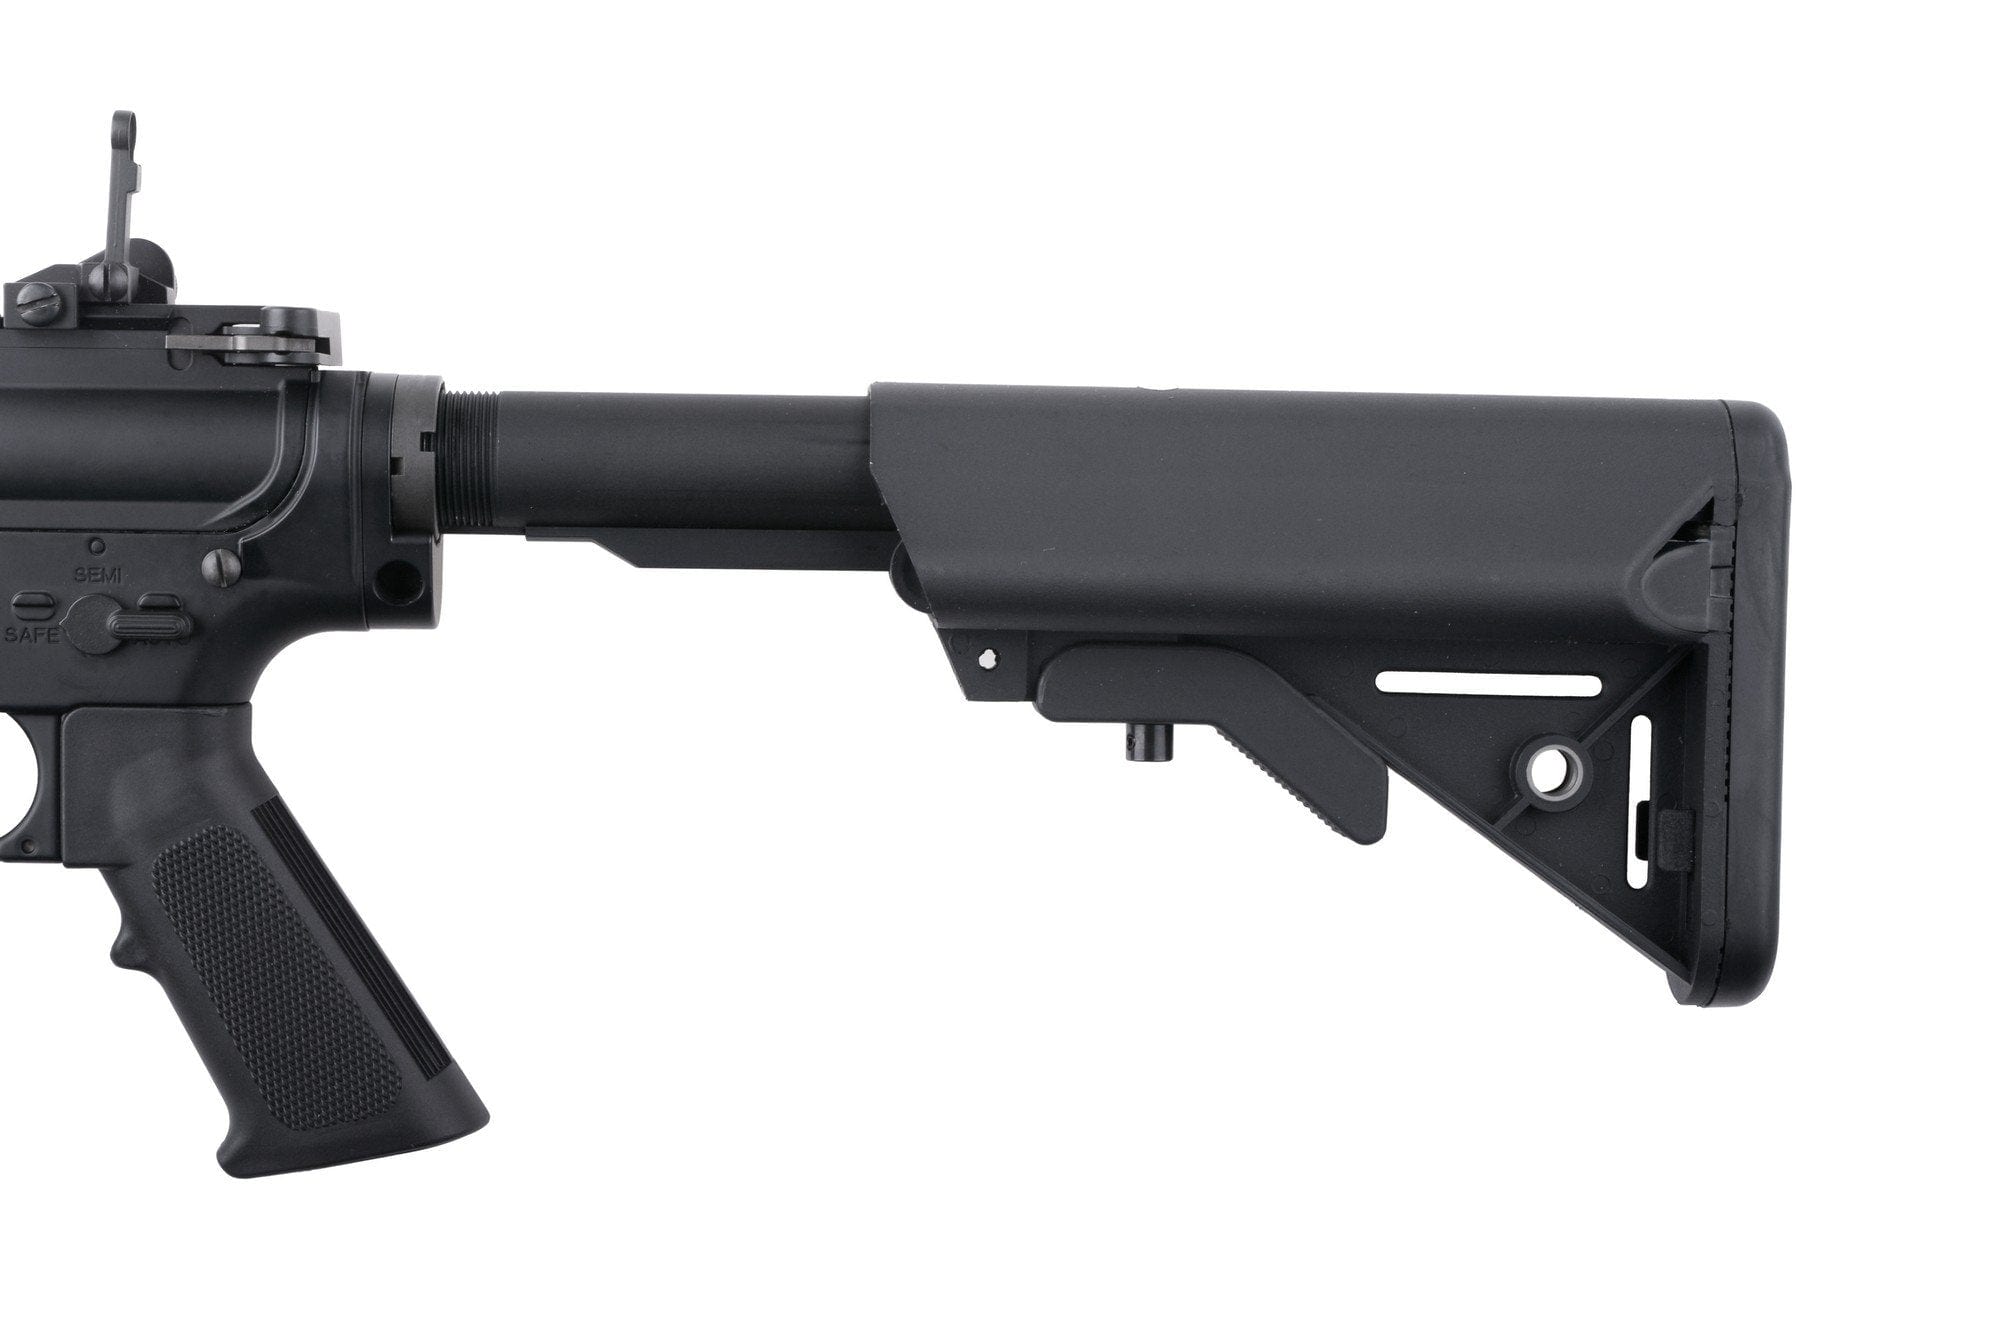 B4 SR16 High Cycle Carbine Replica - Black by BOLT on Airsoft Mania Europe